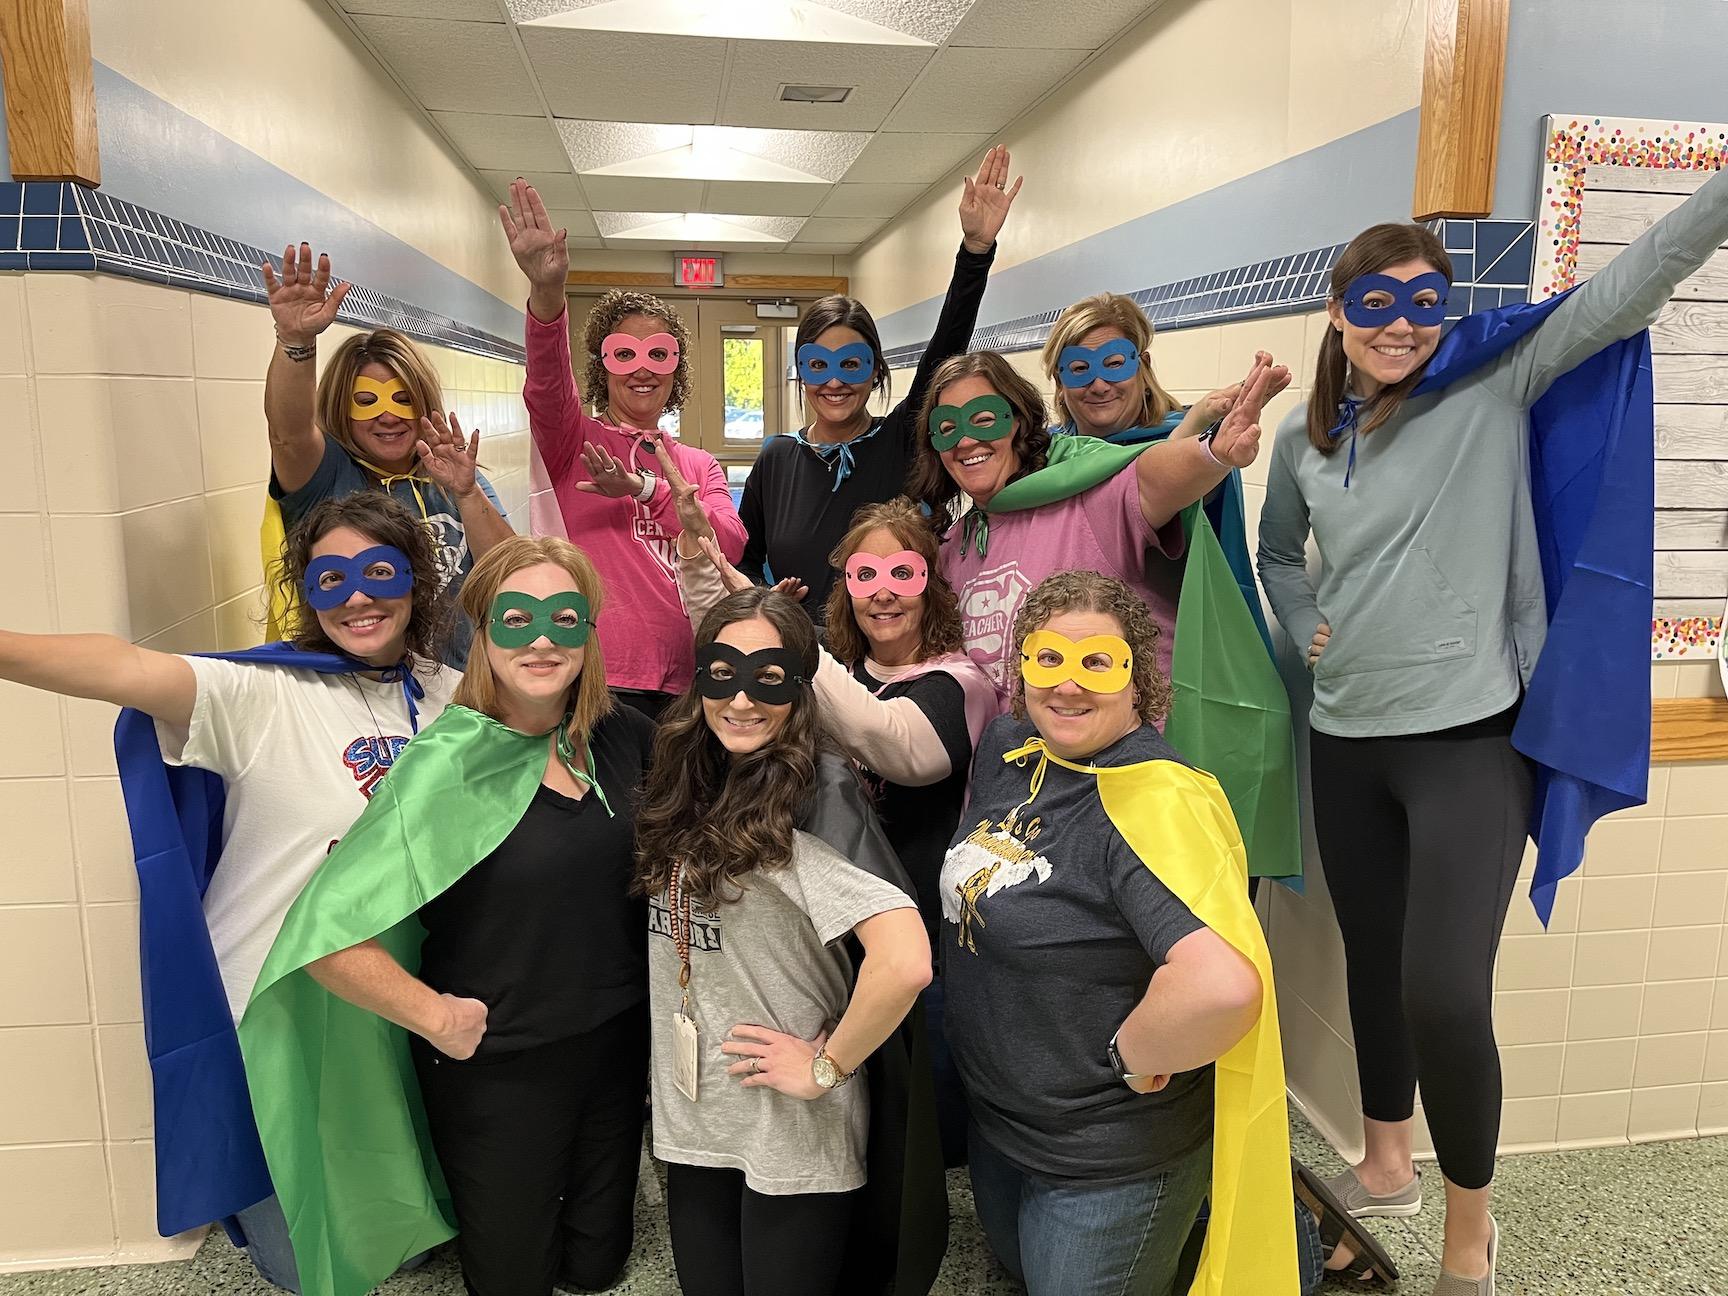 The Sunrise Elementary staff joined the fun for Thursday’s ‘superhero day’ to show they have the power to make excellent decisions